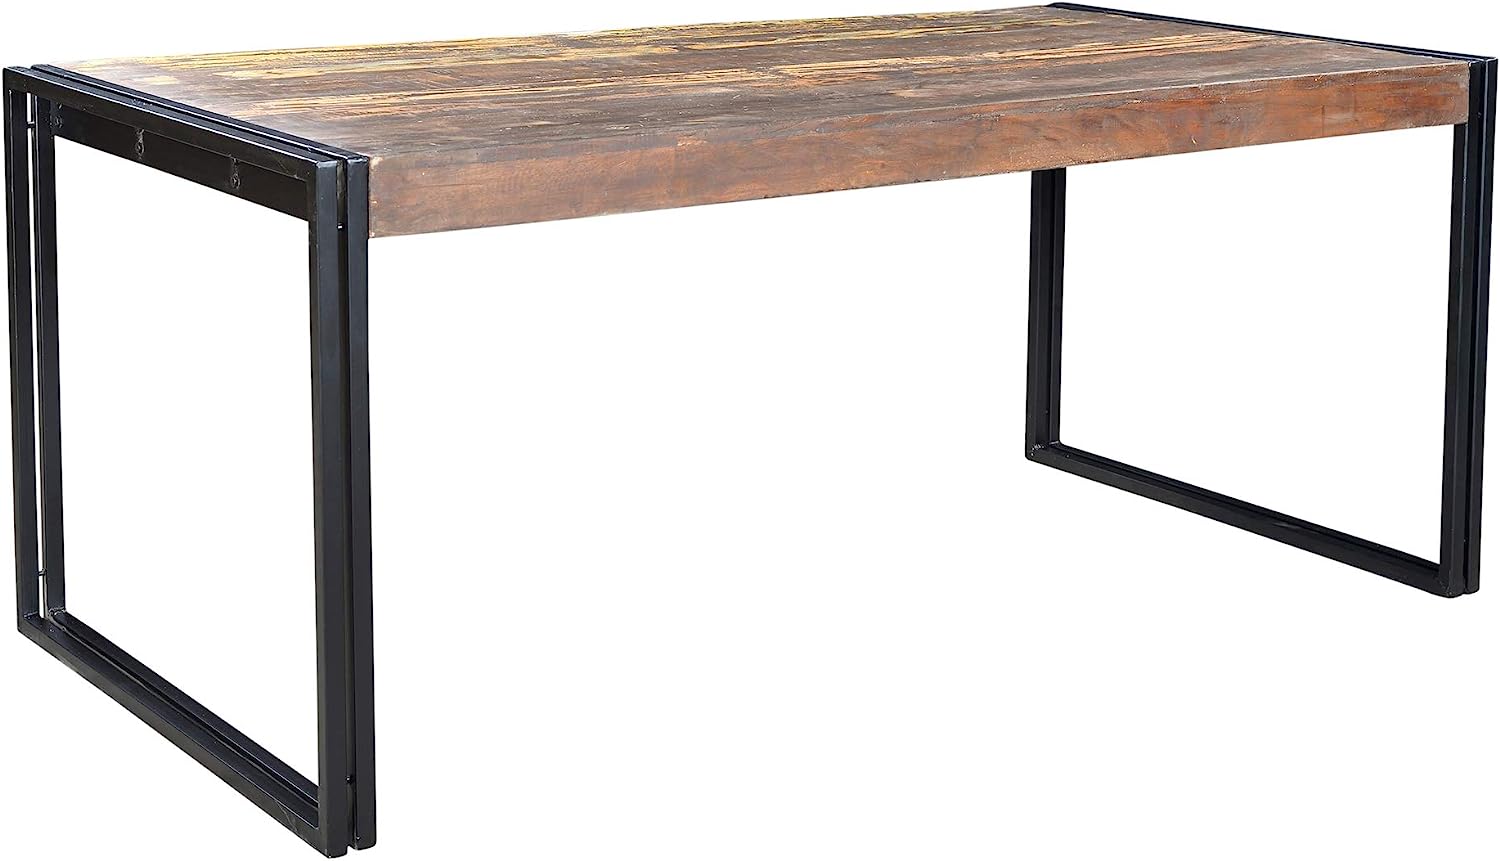 Timbergirl Hand-Crafted Old Reclaimed Wood and Metal Dining Table, 71-Inch - $275